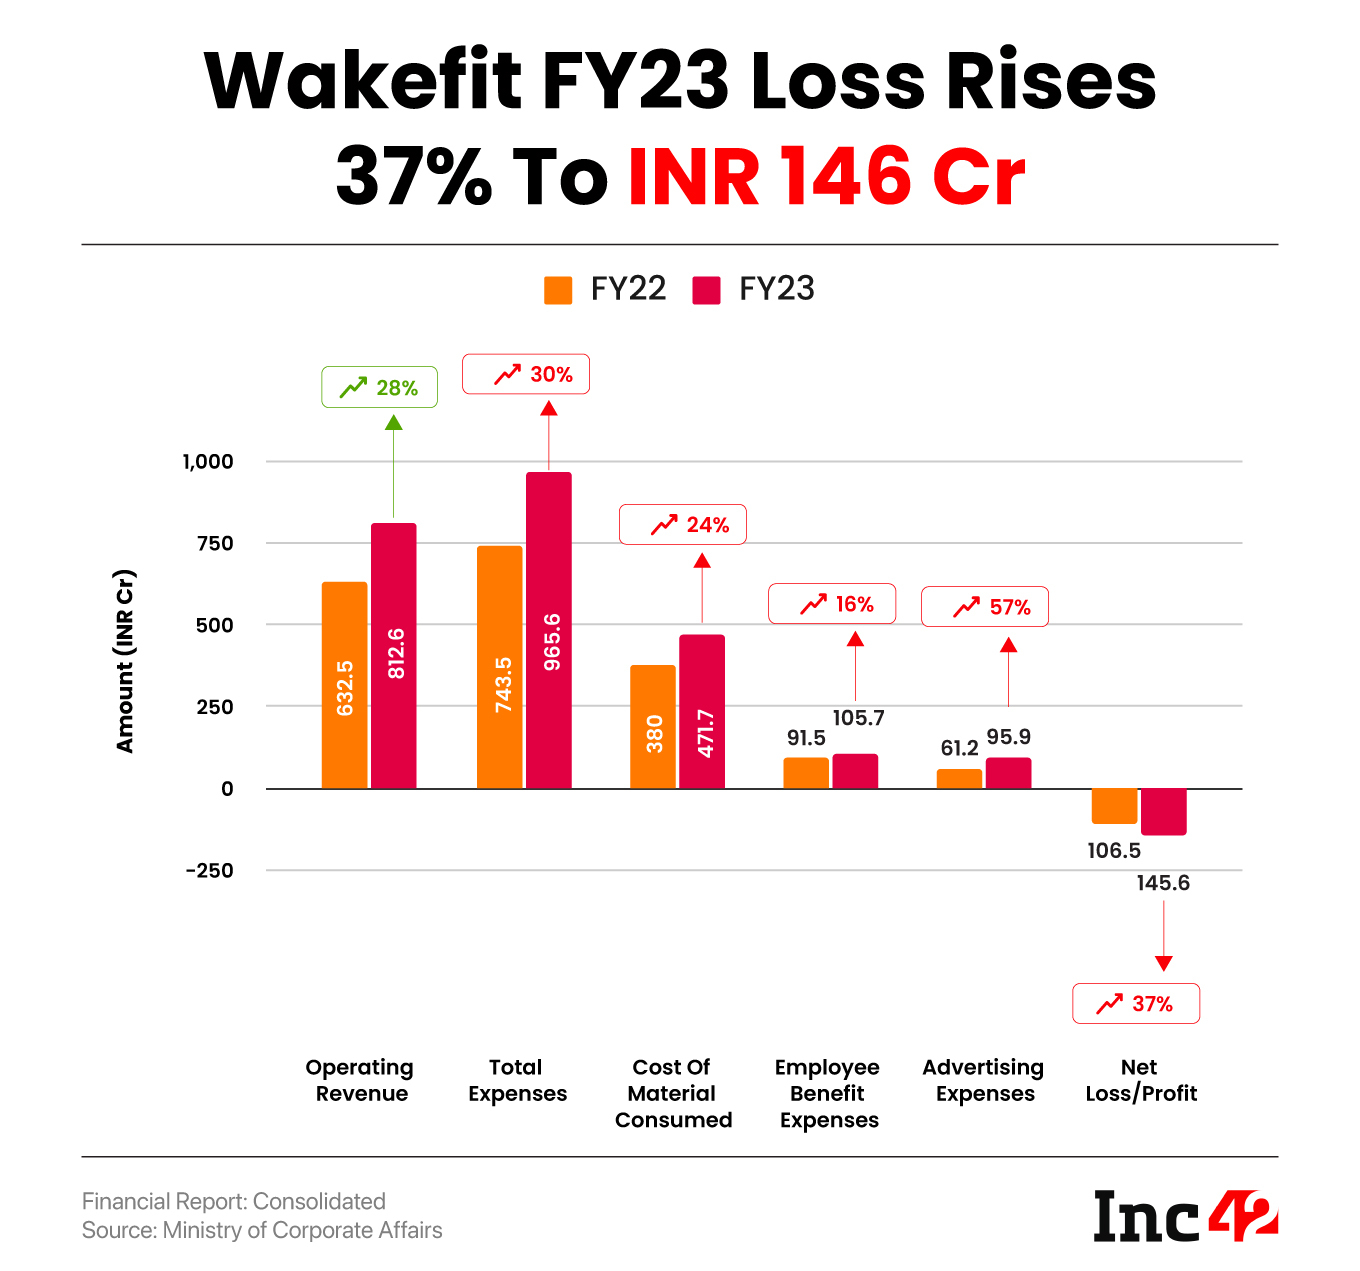 After Spending INR 96 Cr On Advertising, Wakefit Incurs INR 146 Cr Loss In FY23